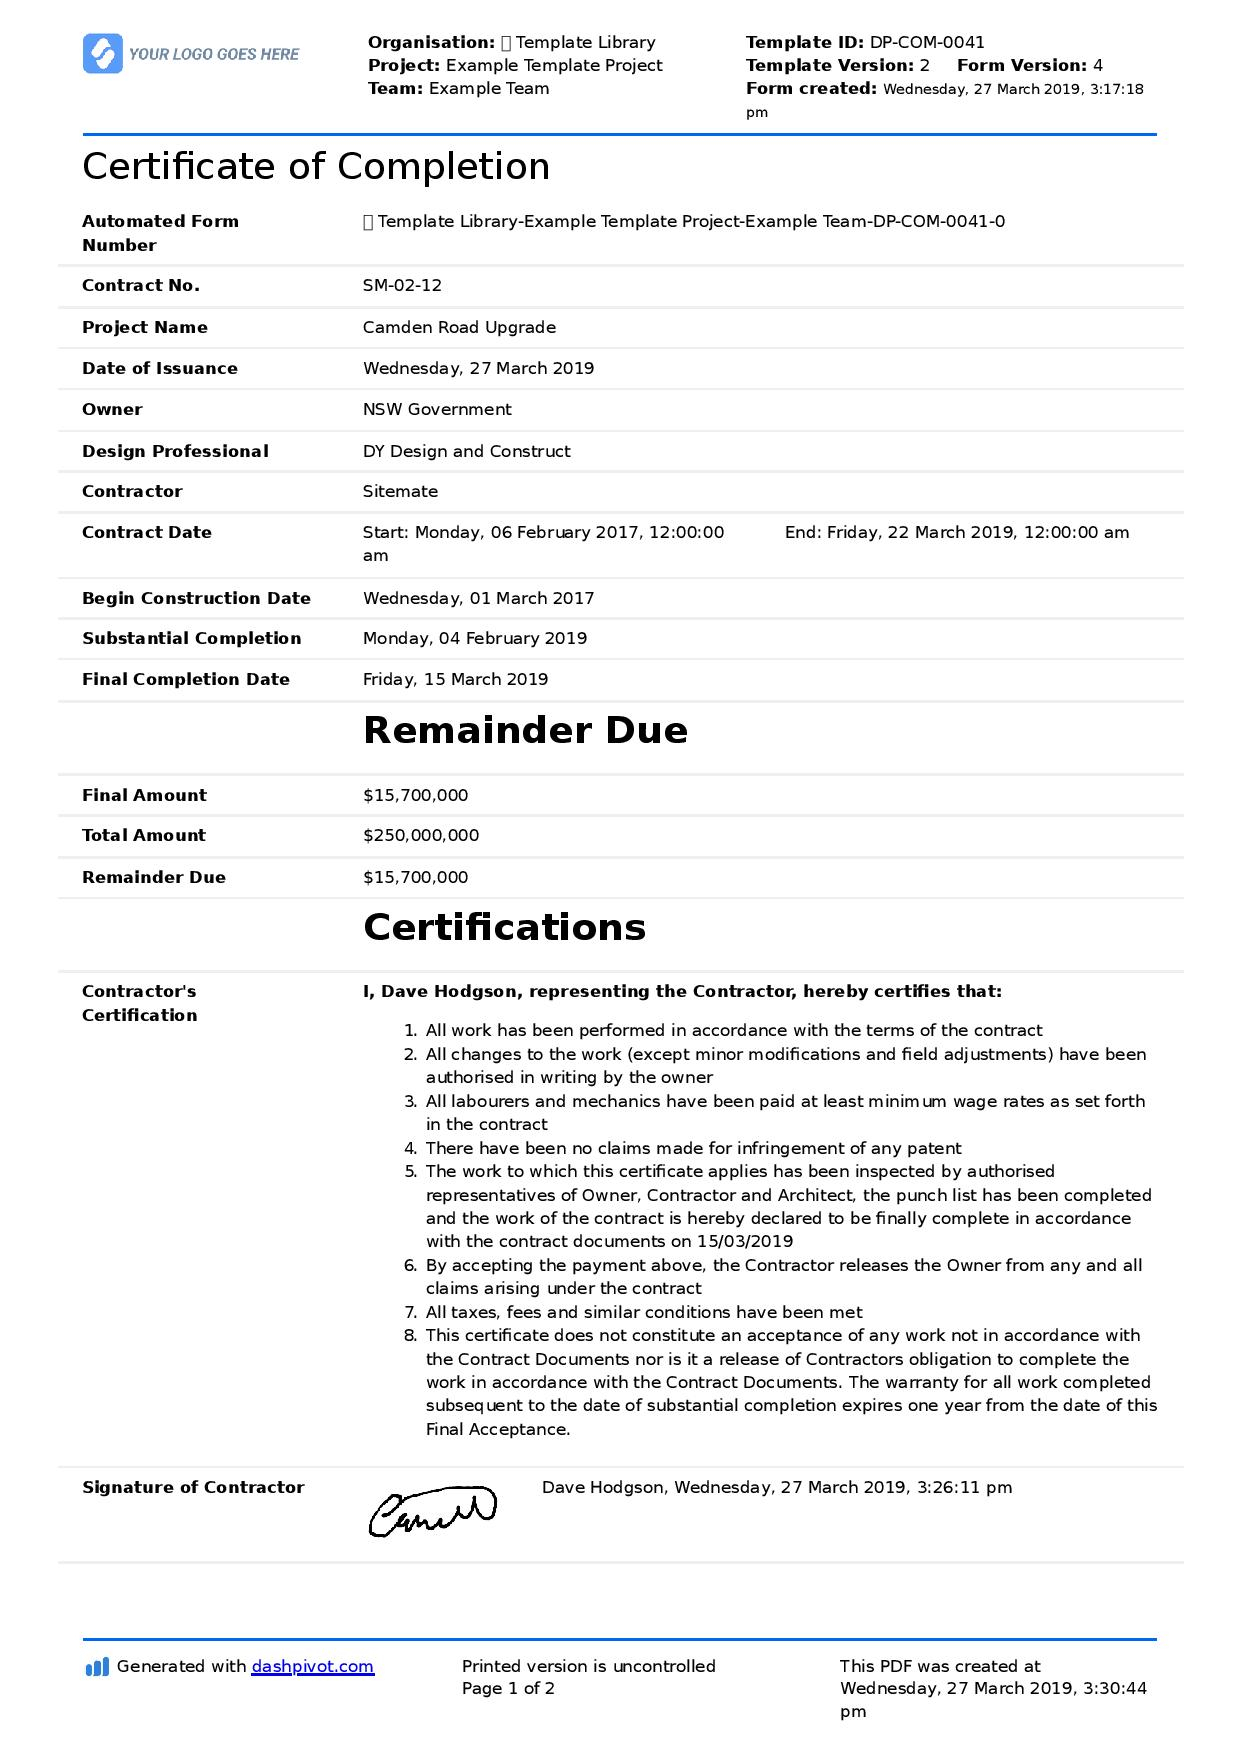 Certificate Of Completion For Construction (Free Template + Sample) throughout Construction Certificate Of Completion Template